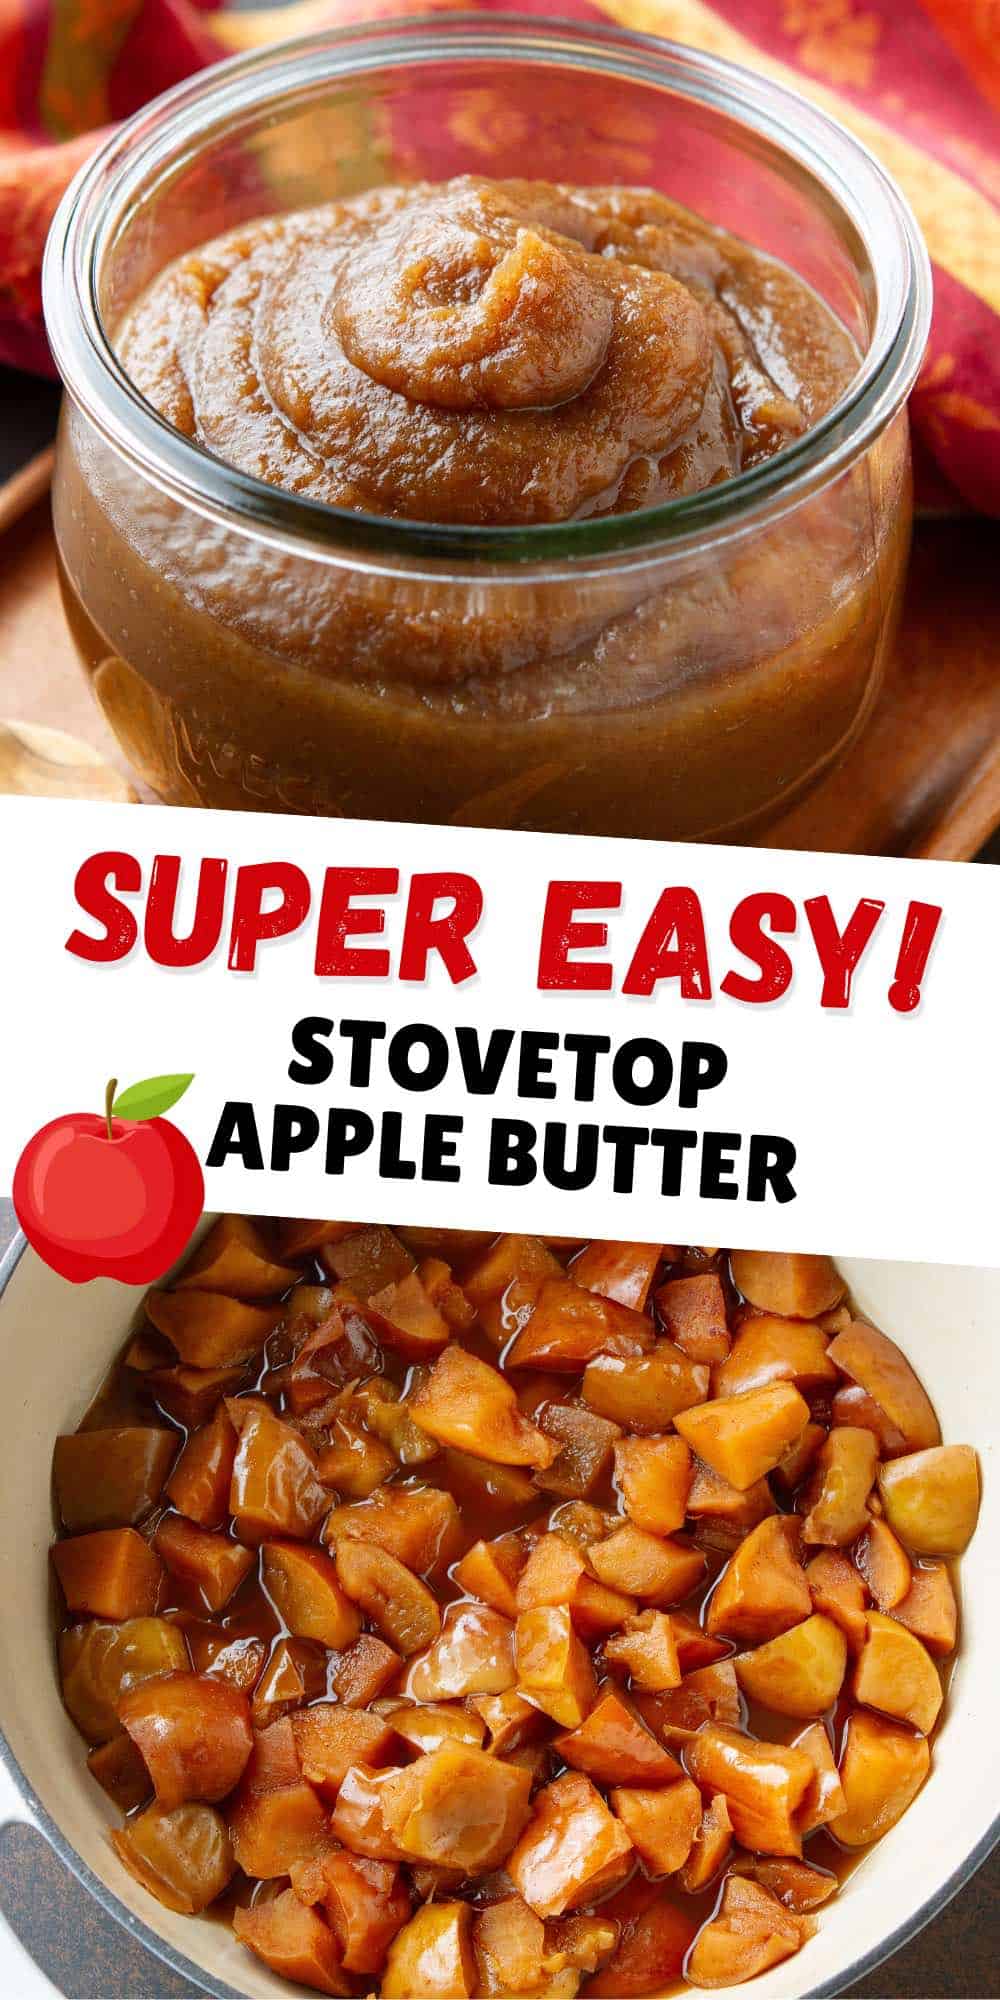 Stovetop apple butter is everything that's right with autumn. Richly flavored with fall spices. Spread it on sandwiches, use it as a side dish or incorporate into baking dishes. | Recipe | Maple syrup